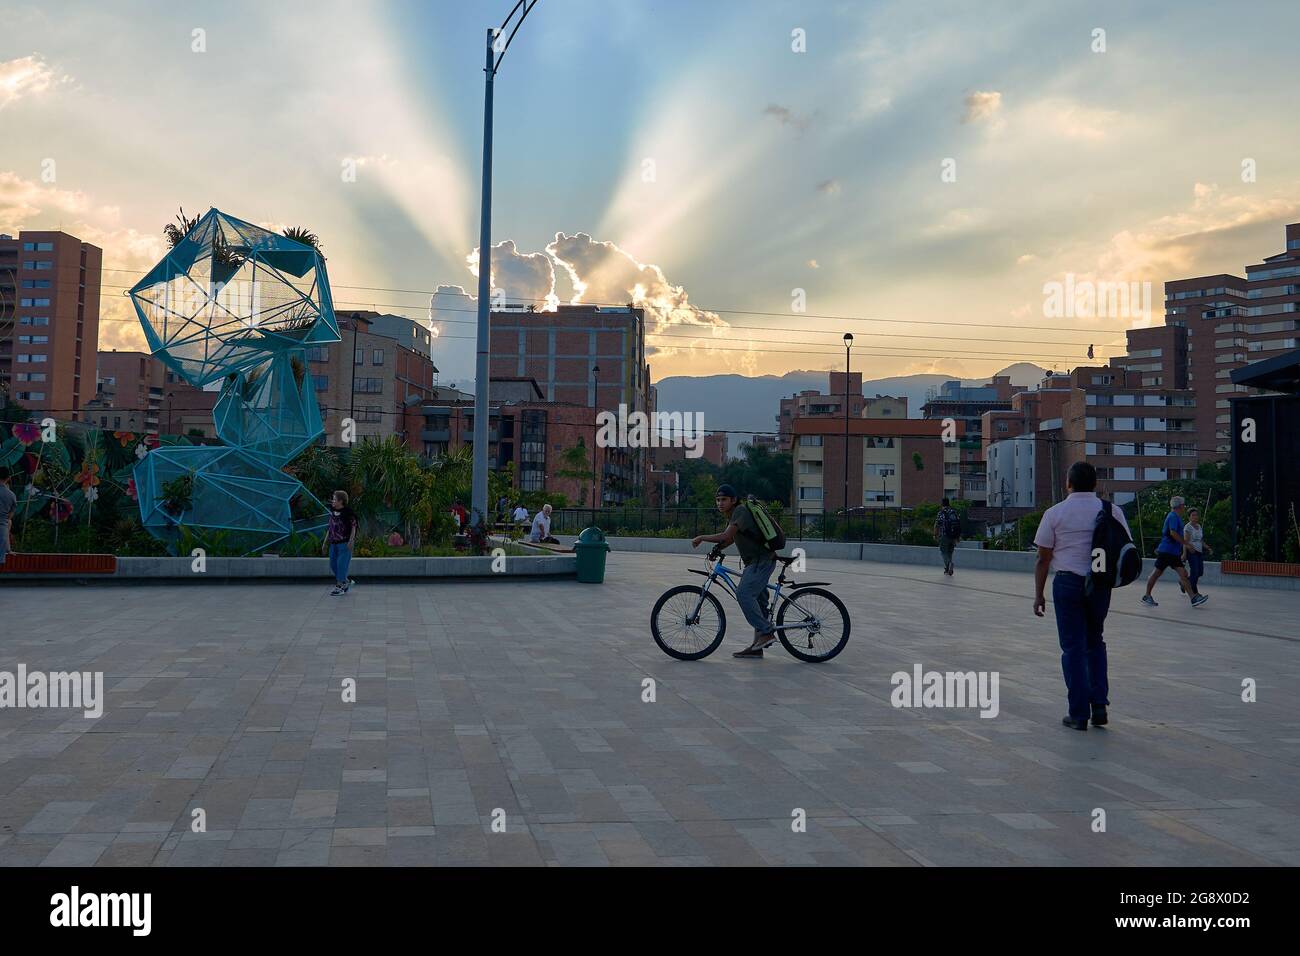 MEDELLIN, COLOMBIA - Sep 01, 2019: The beautiful sunset in the Medellin River Parks in Colombia Stock Photo